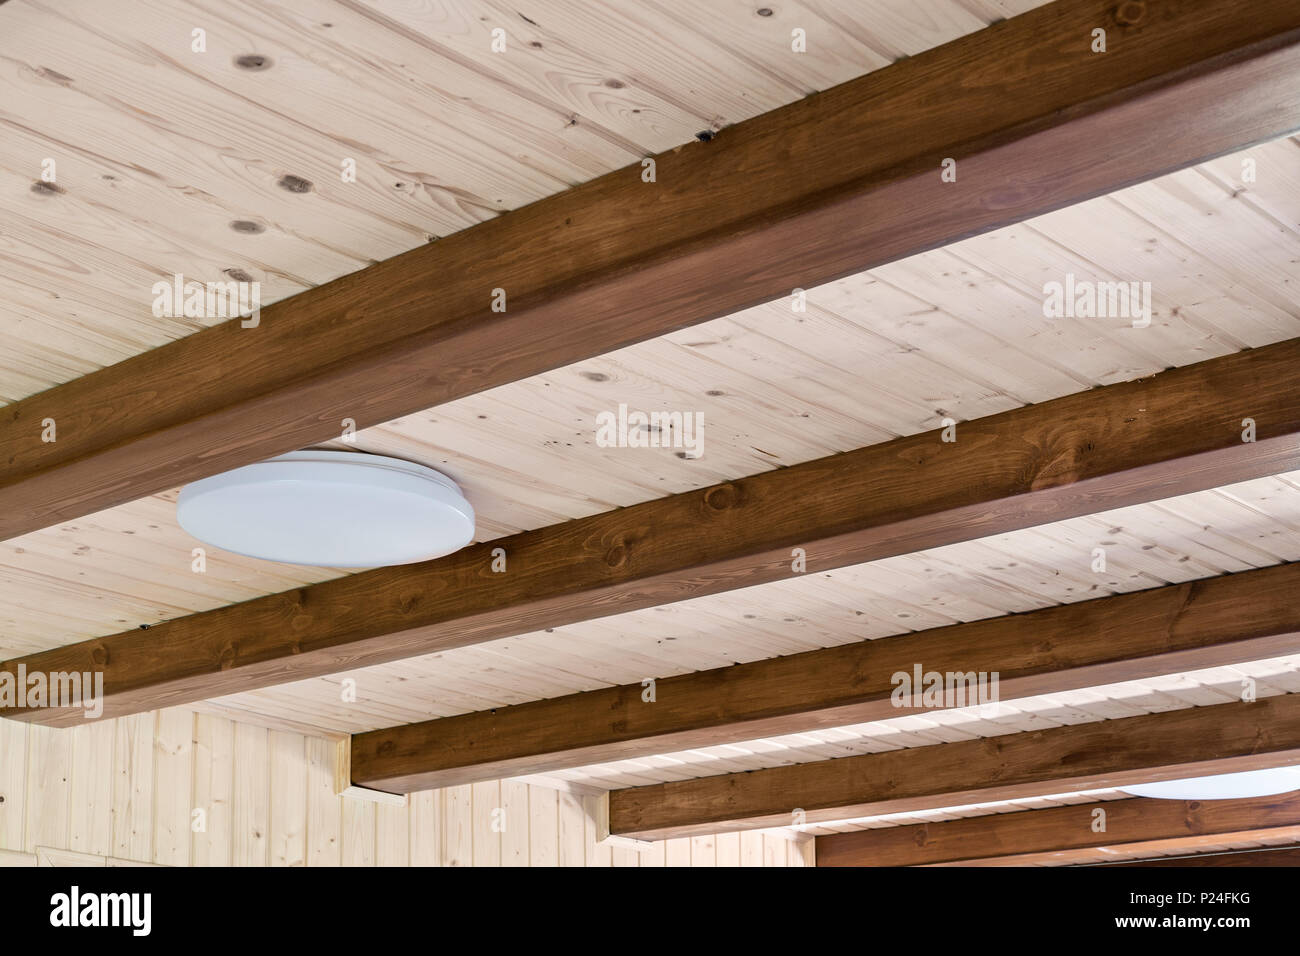 Rustic house ceiling with wide wooden beam support. Country home interior. Building natural decoration materials. Stock Photo